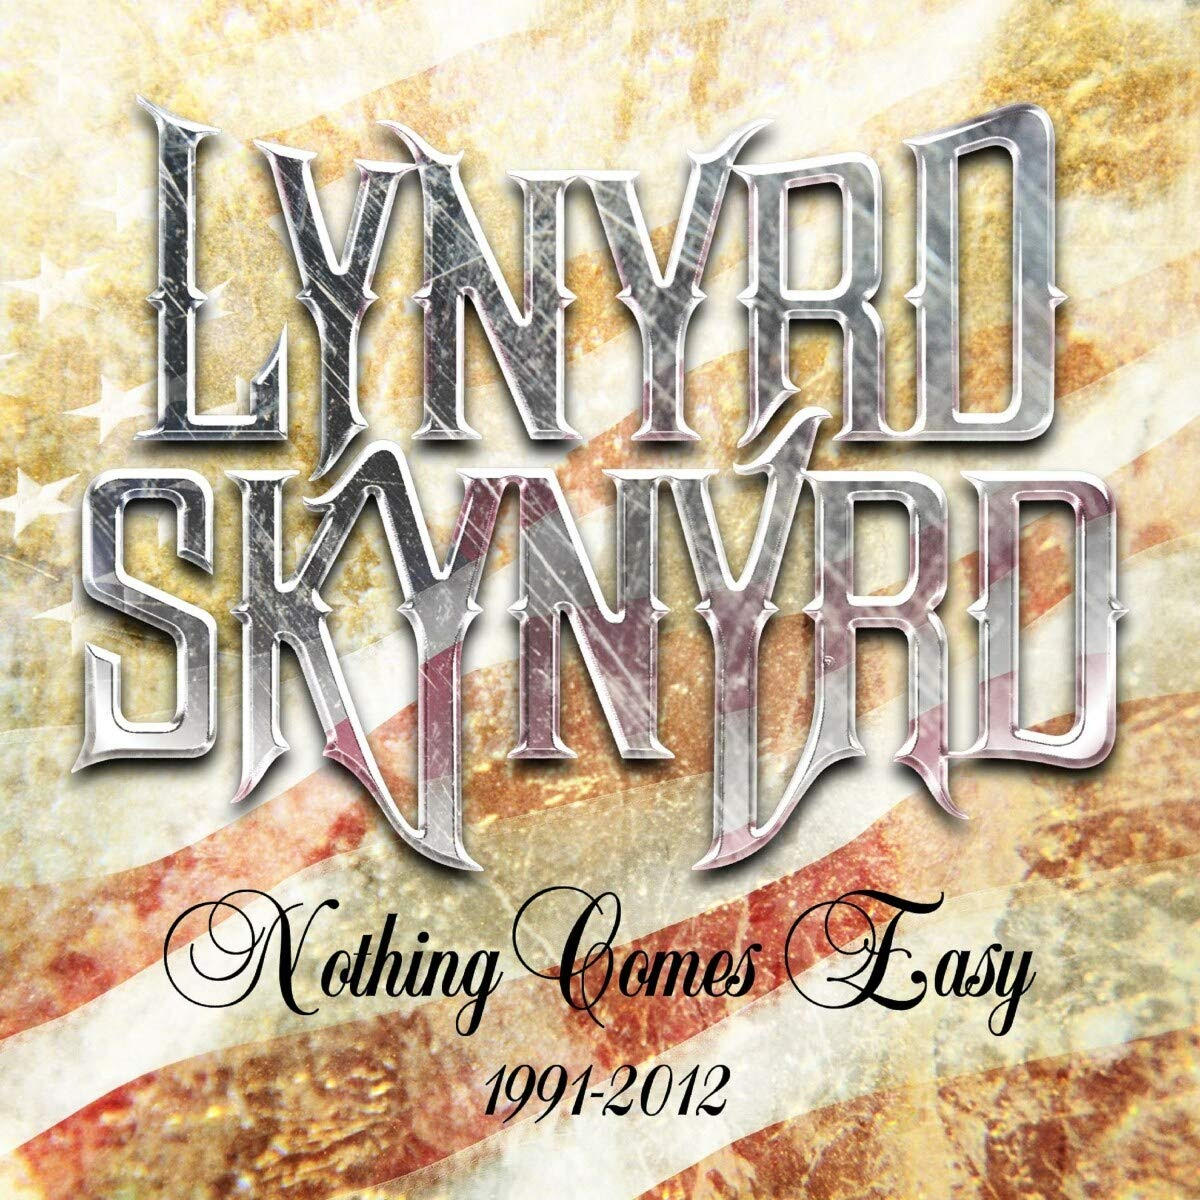 Lynyrd Skynyrd: Nothing Comes Easy 1991-2012 (5 CD Box Set - Imported)